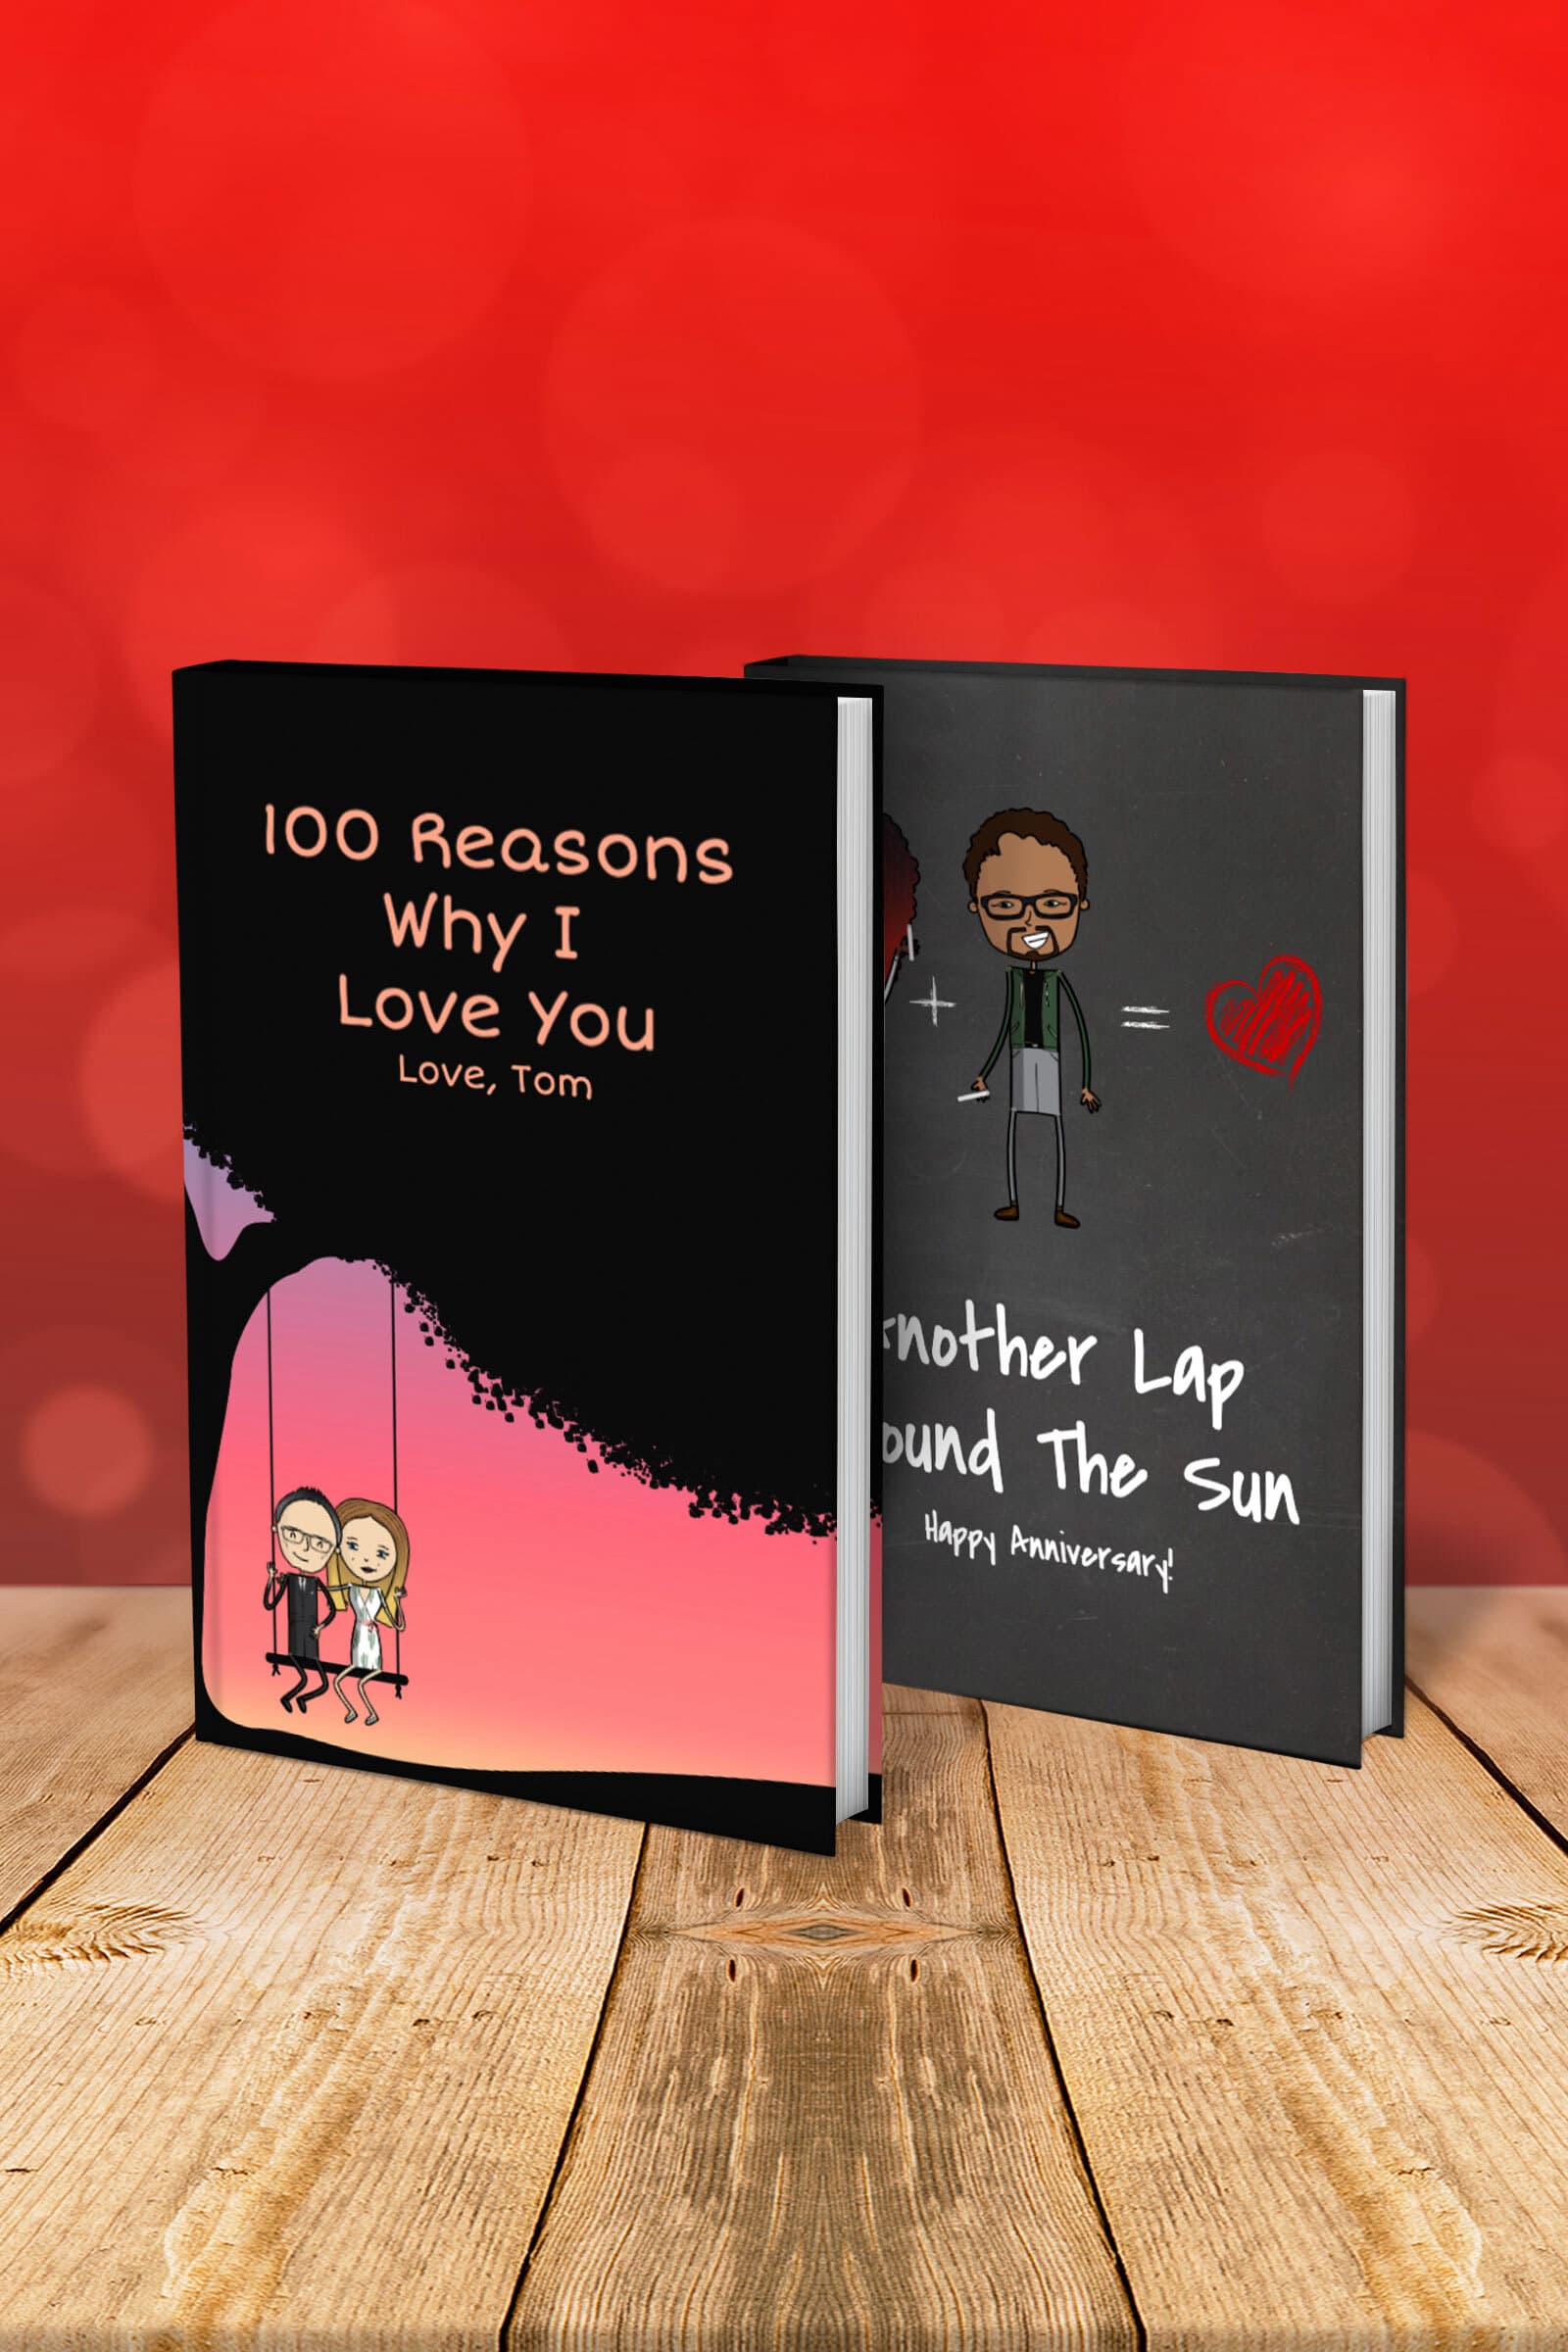 50 Reasons Why I Love You Books (set of 2)